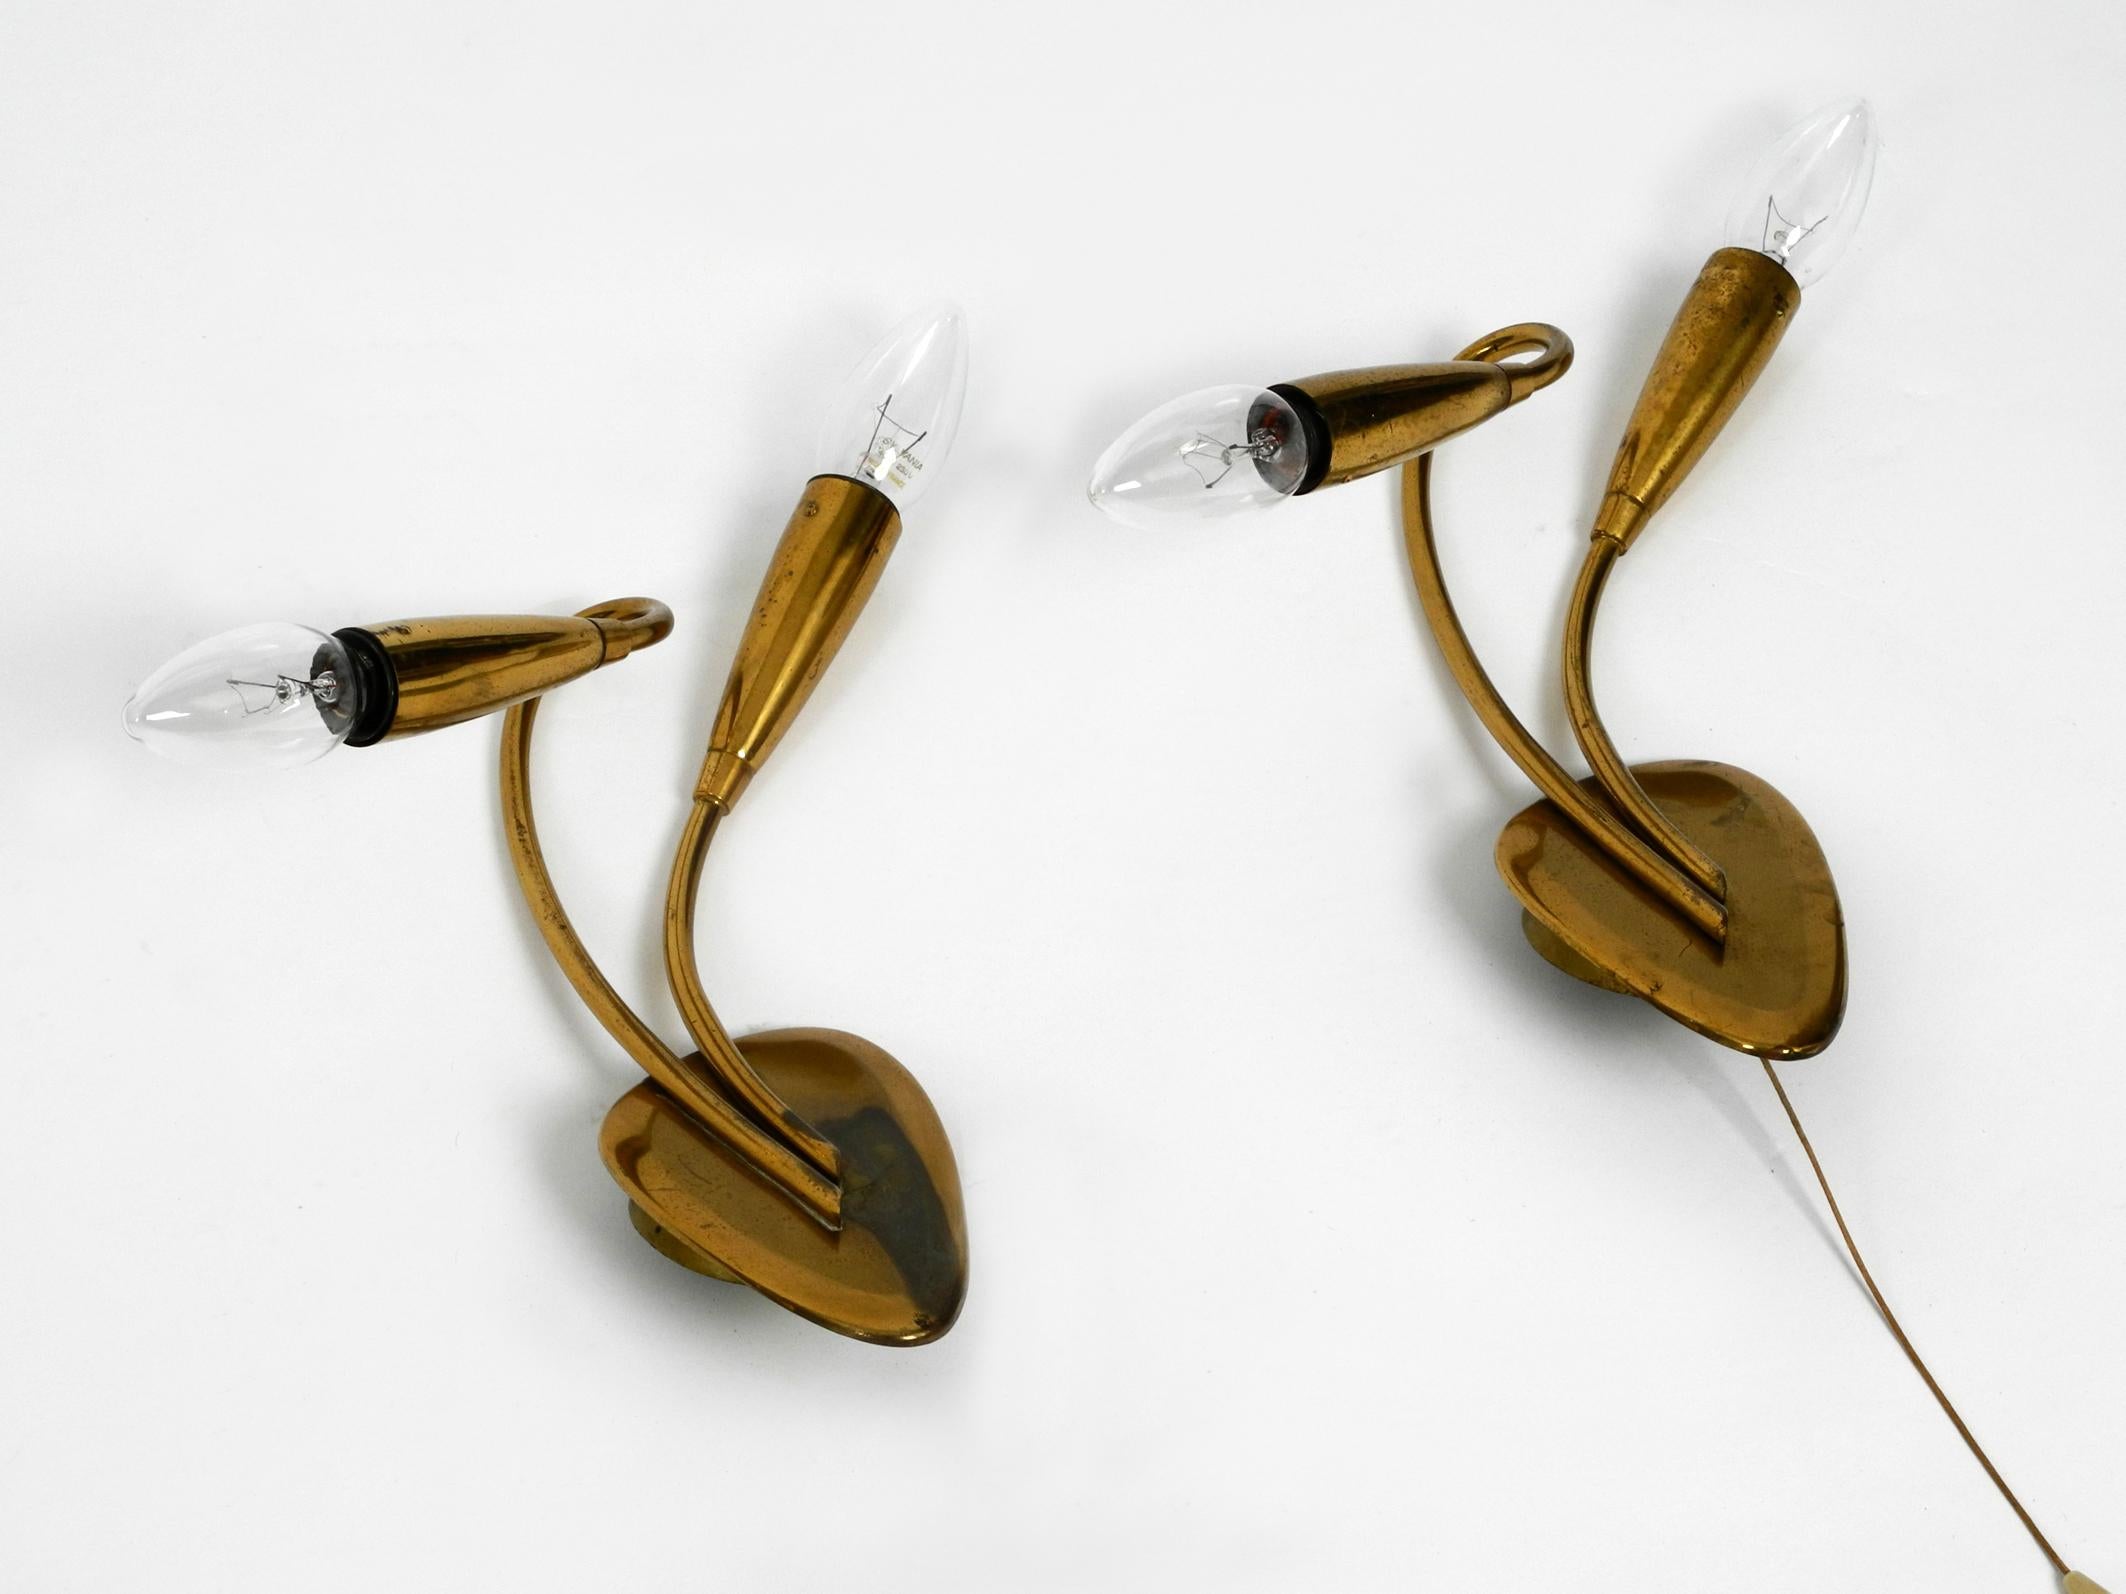 Pair of elegant 2-arm midcentury brass sconces.
Typical 1950s minimalistic design. Two E14 sockets each.
100% original condition and fully functional. Tested by an electrician.
Both lamps have a pull switch, but one cord is missing.
Very nice